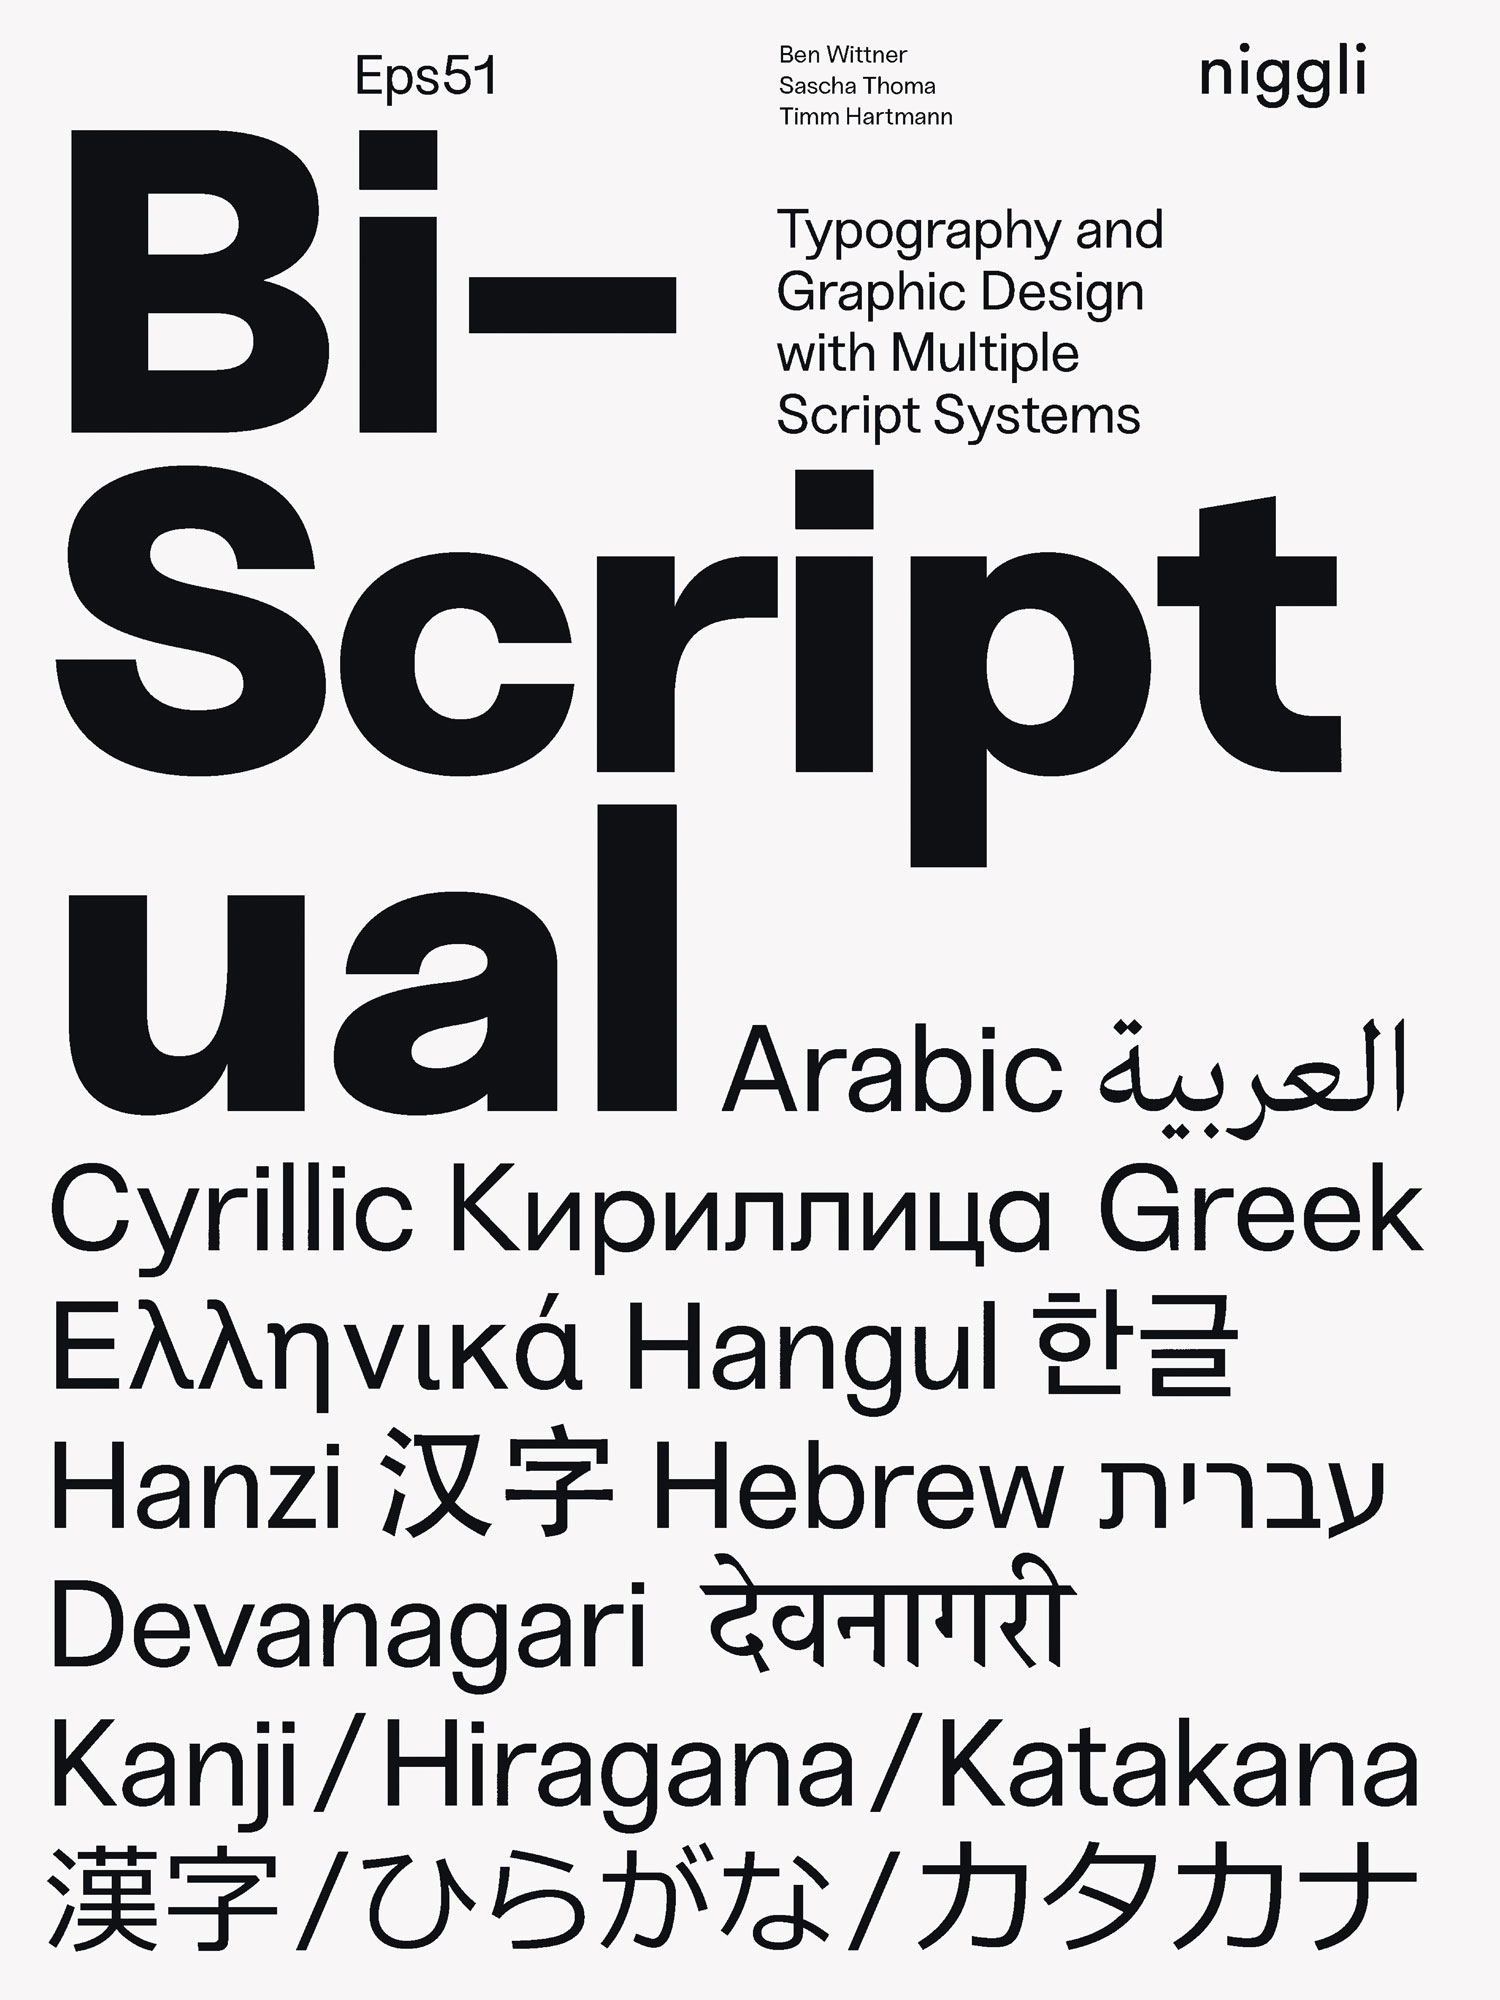 Bi-Scriptual—Typography and Graphic Design with Multiple Script Systems